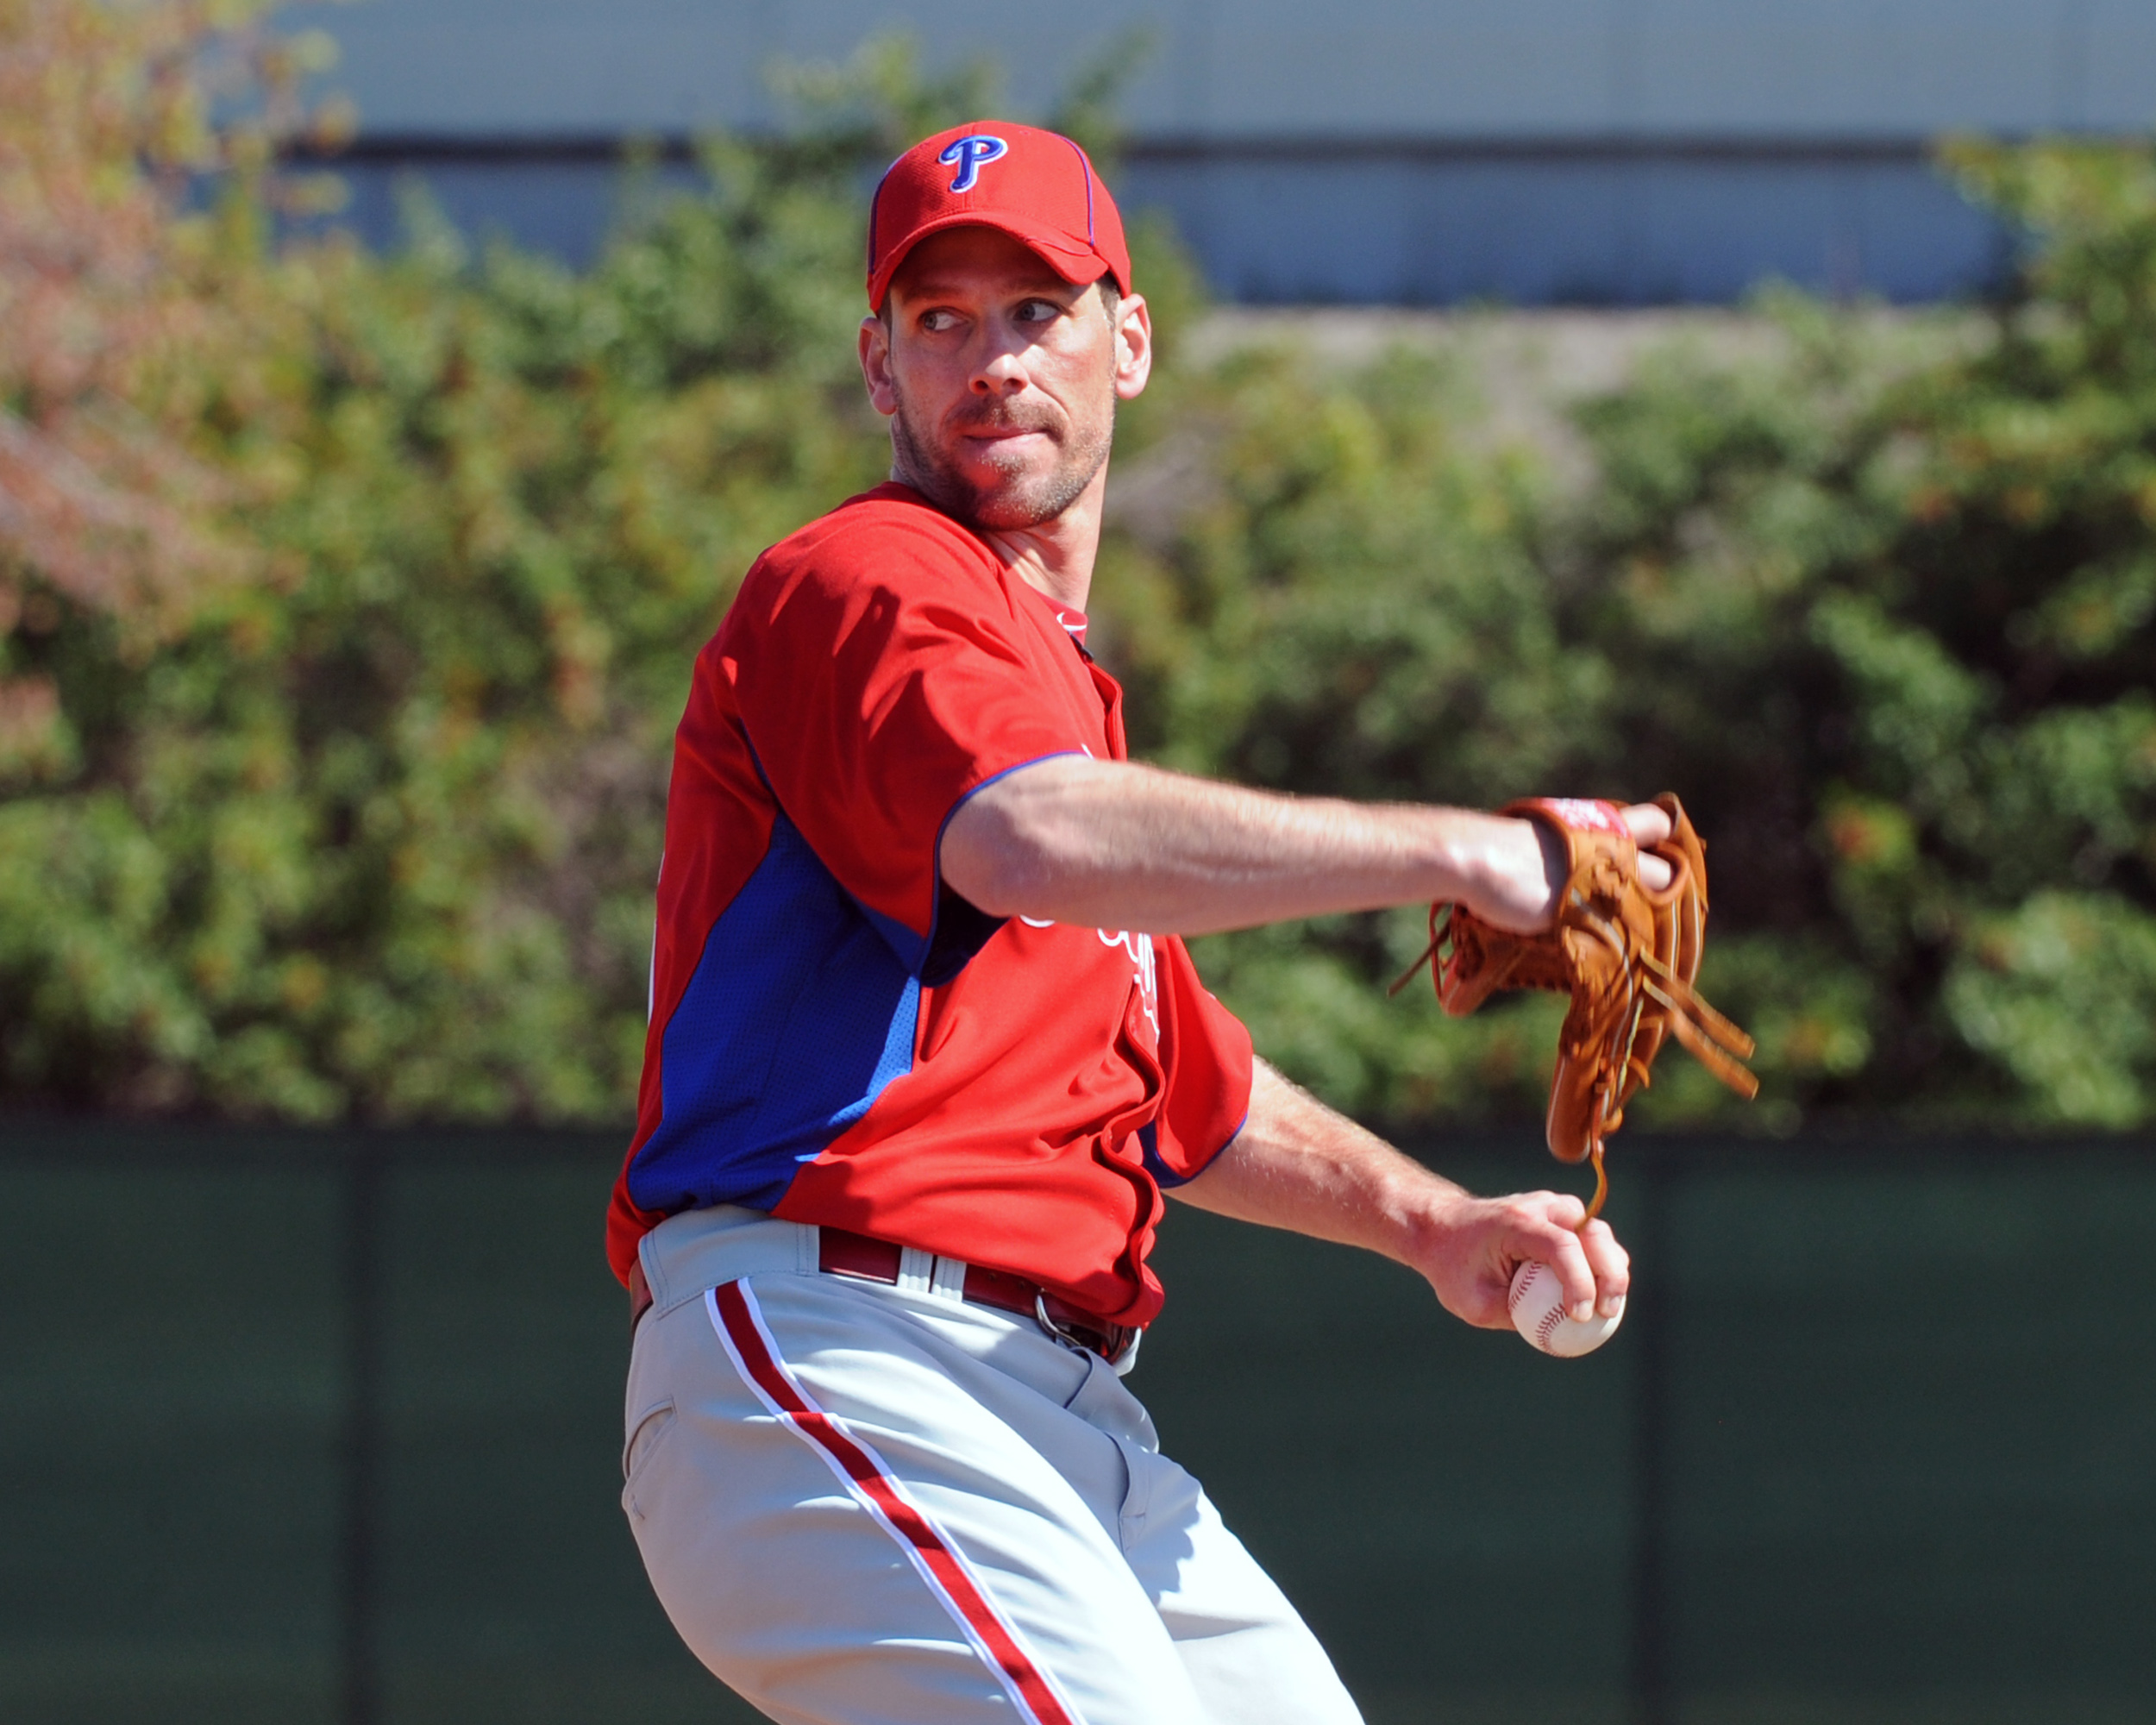 CLEARWATER, FL - FEBRUARY 19:  Pitcher Cliff Lee #33 of the Philadelphia Phillies throws from the mound during a spring training workout February 19, 2011 the Carpenter Complex at Bright House Field in Clearwater, Florida. (Photo by Al Messerschmidt/Getty